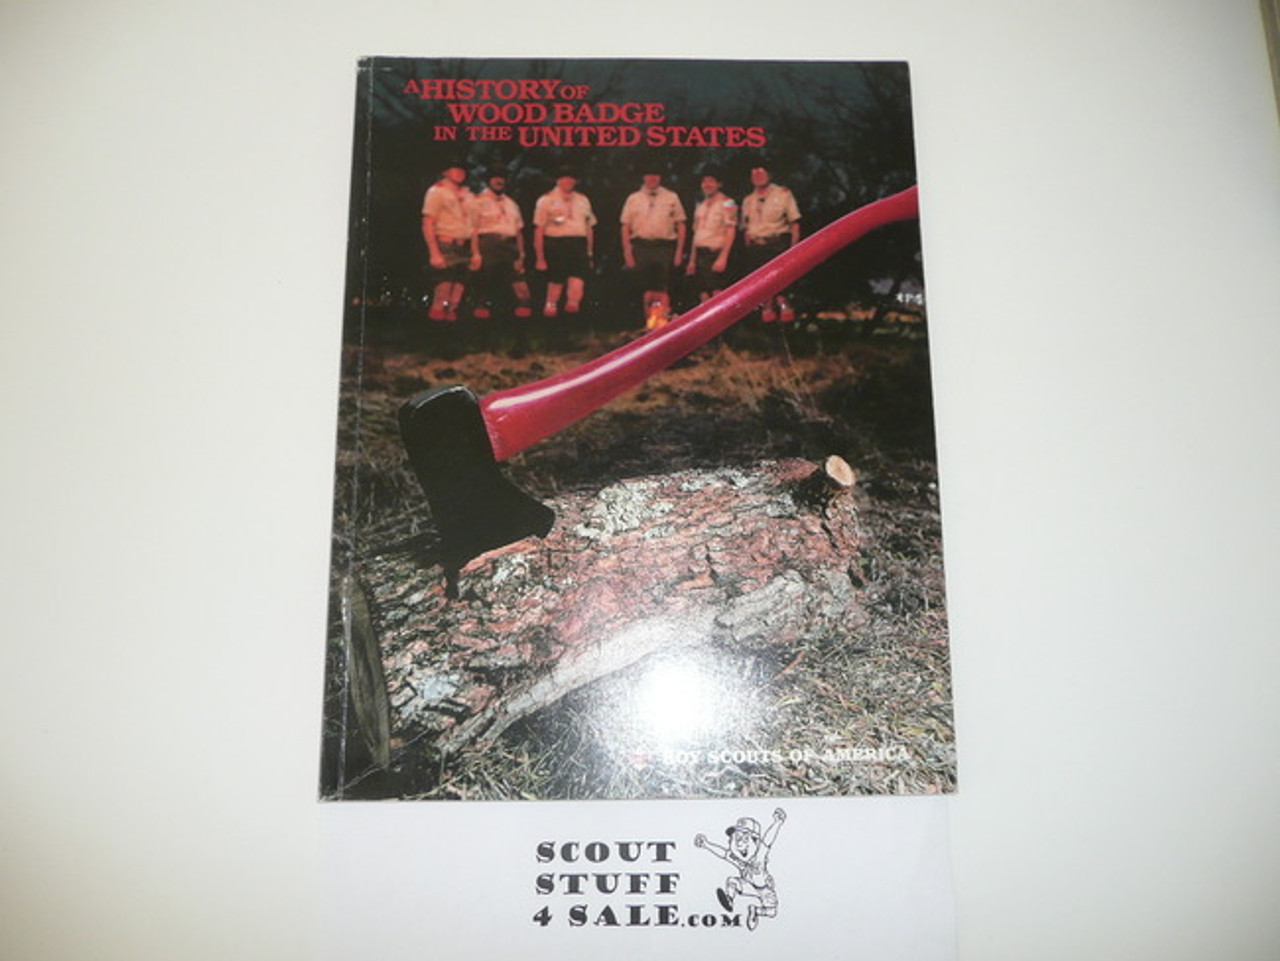 1988 A History of Wood Badge in the United States, 1990 printing